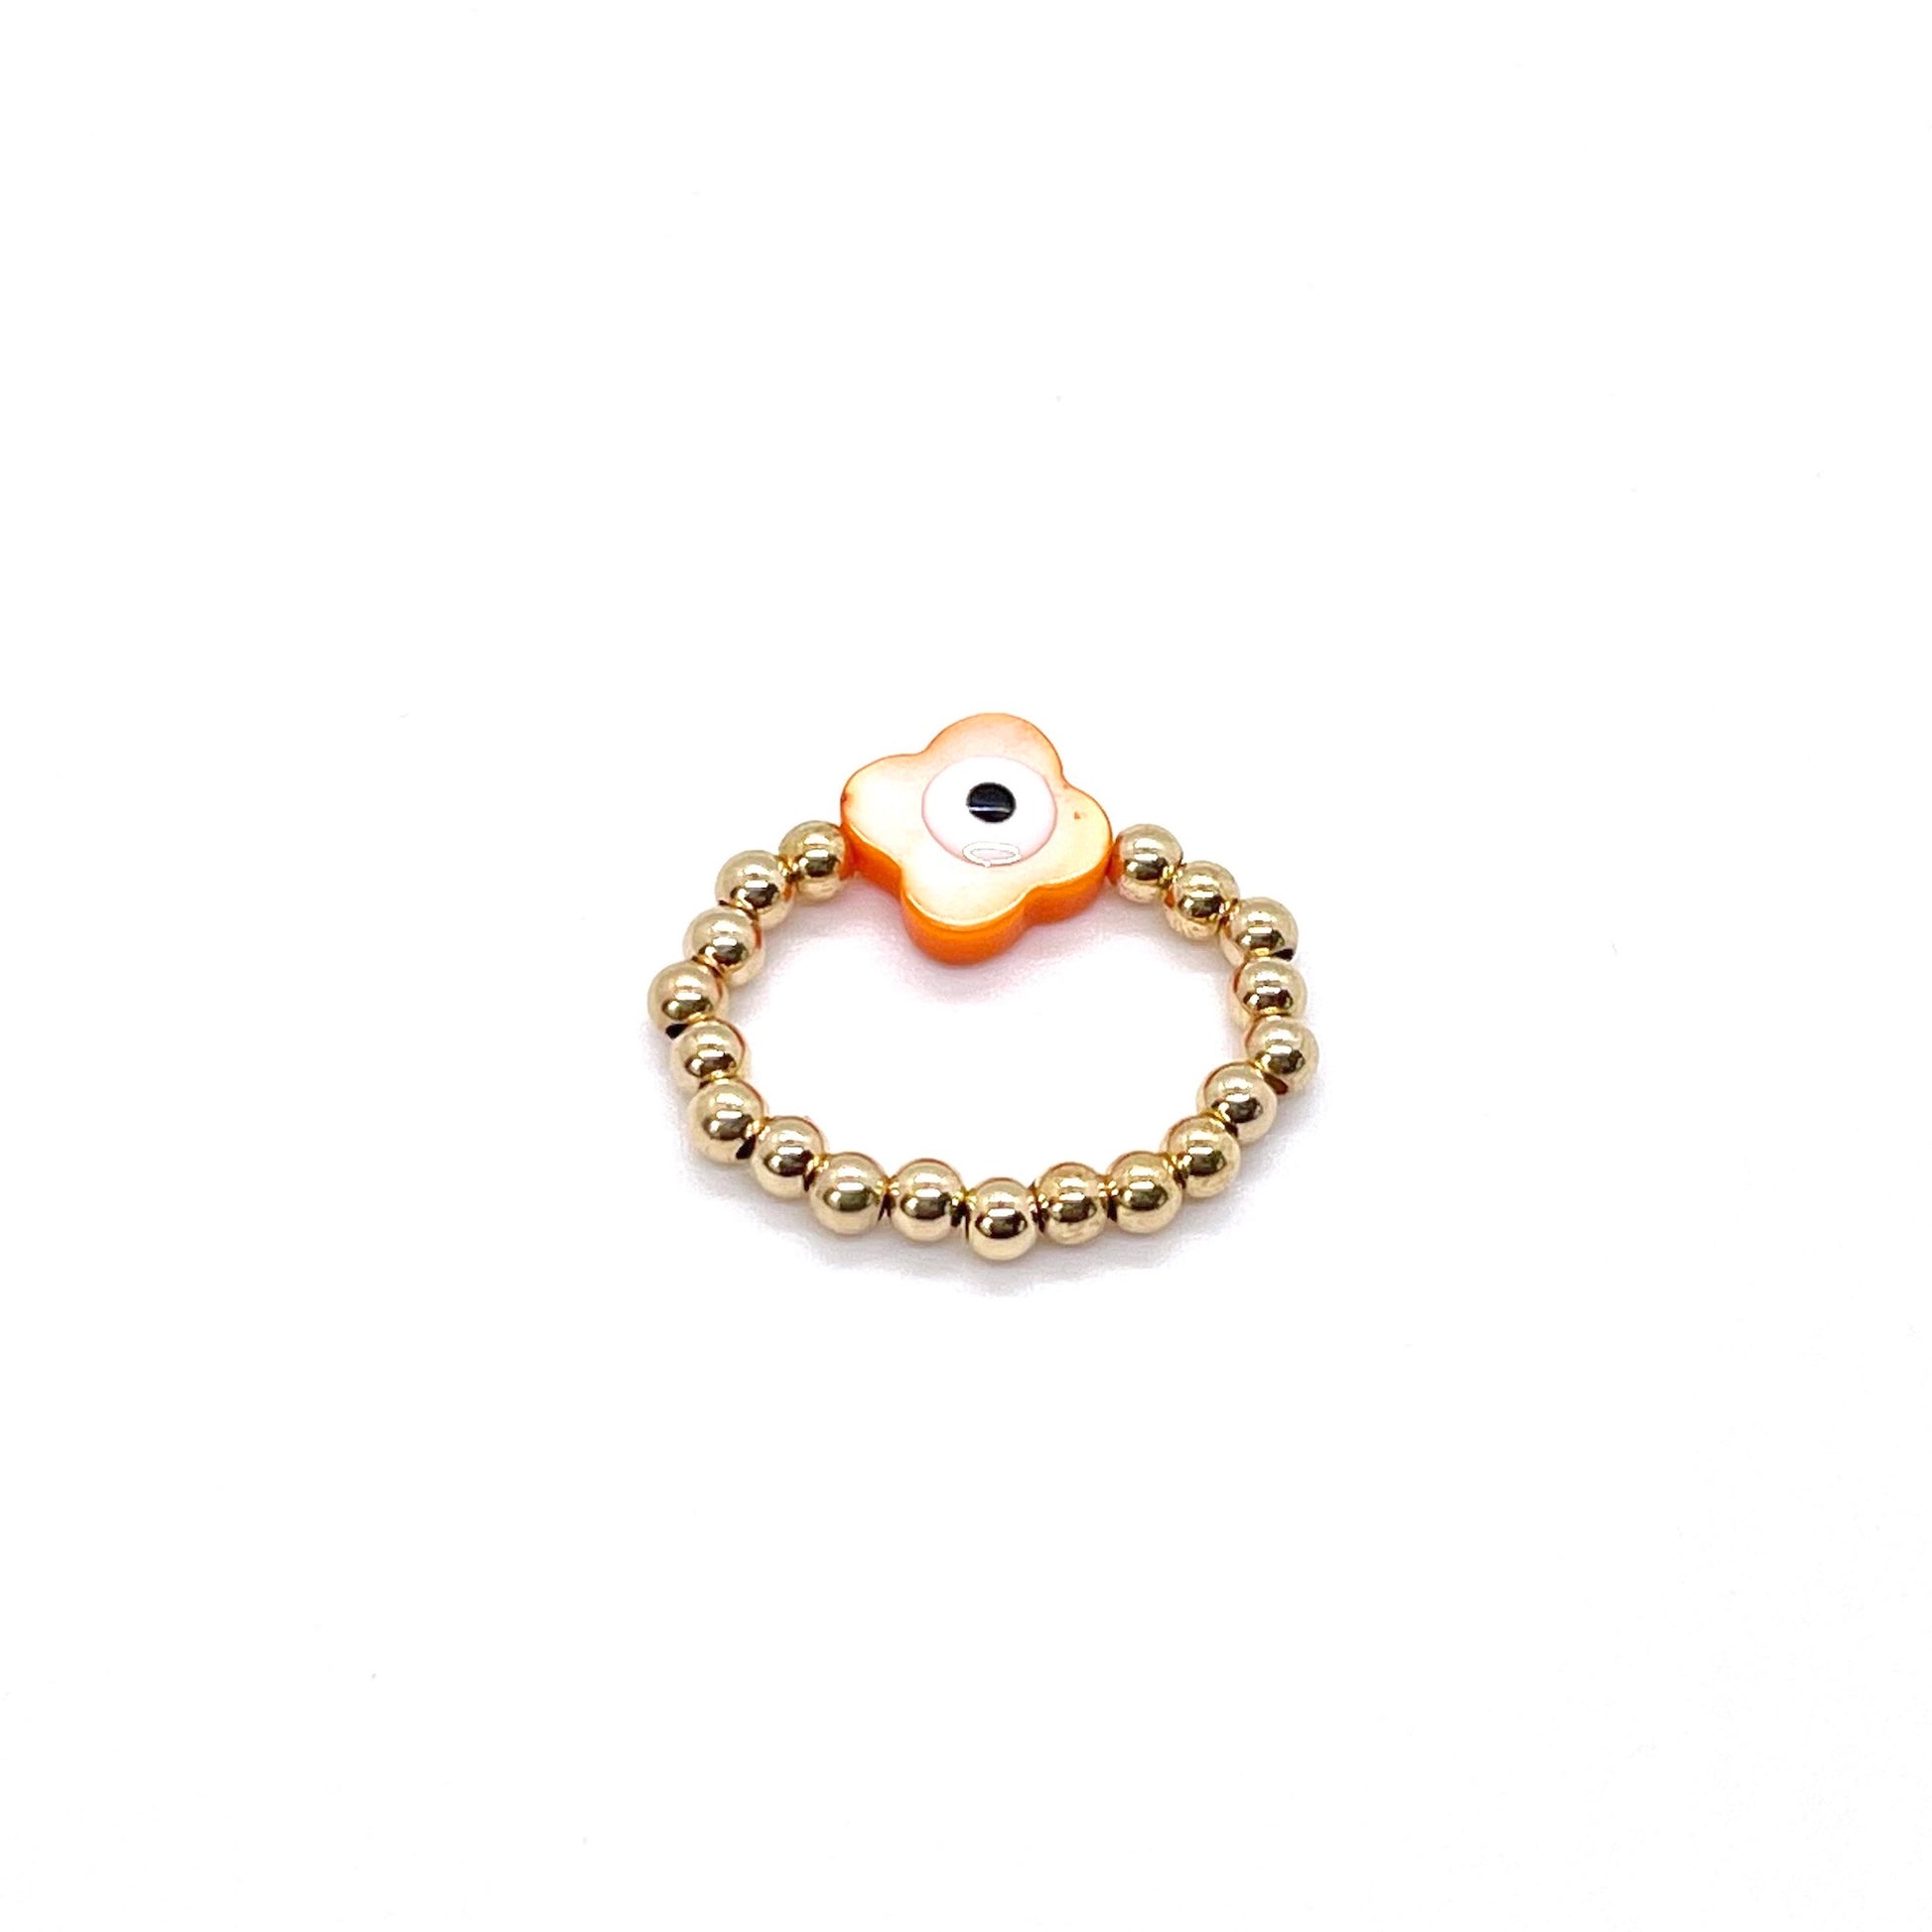 Evil eye gold ring with orange shell evil eye on 3mm gold ball stretch band.